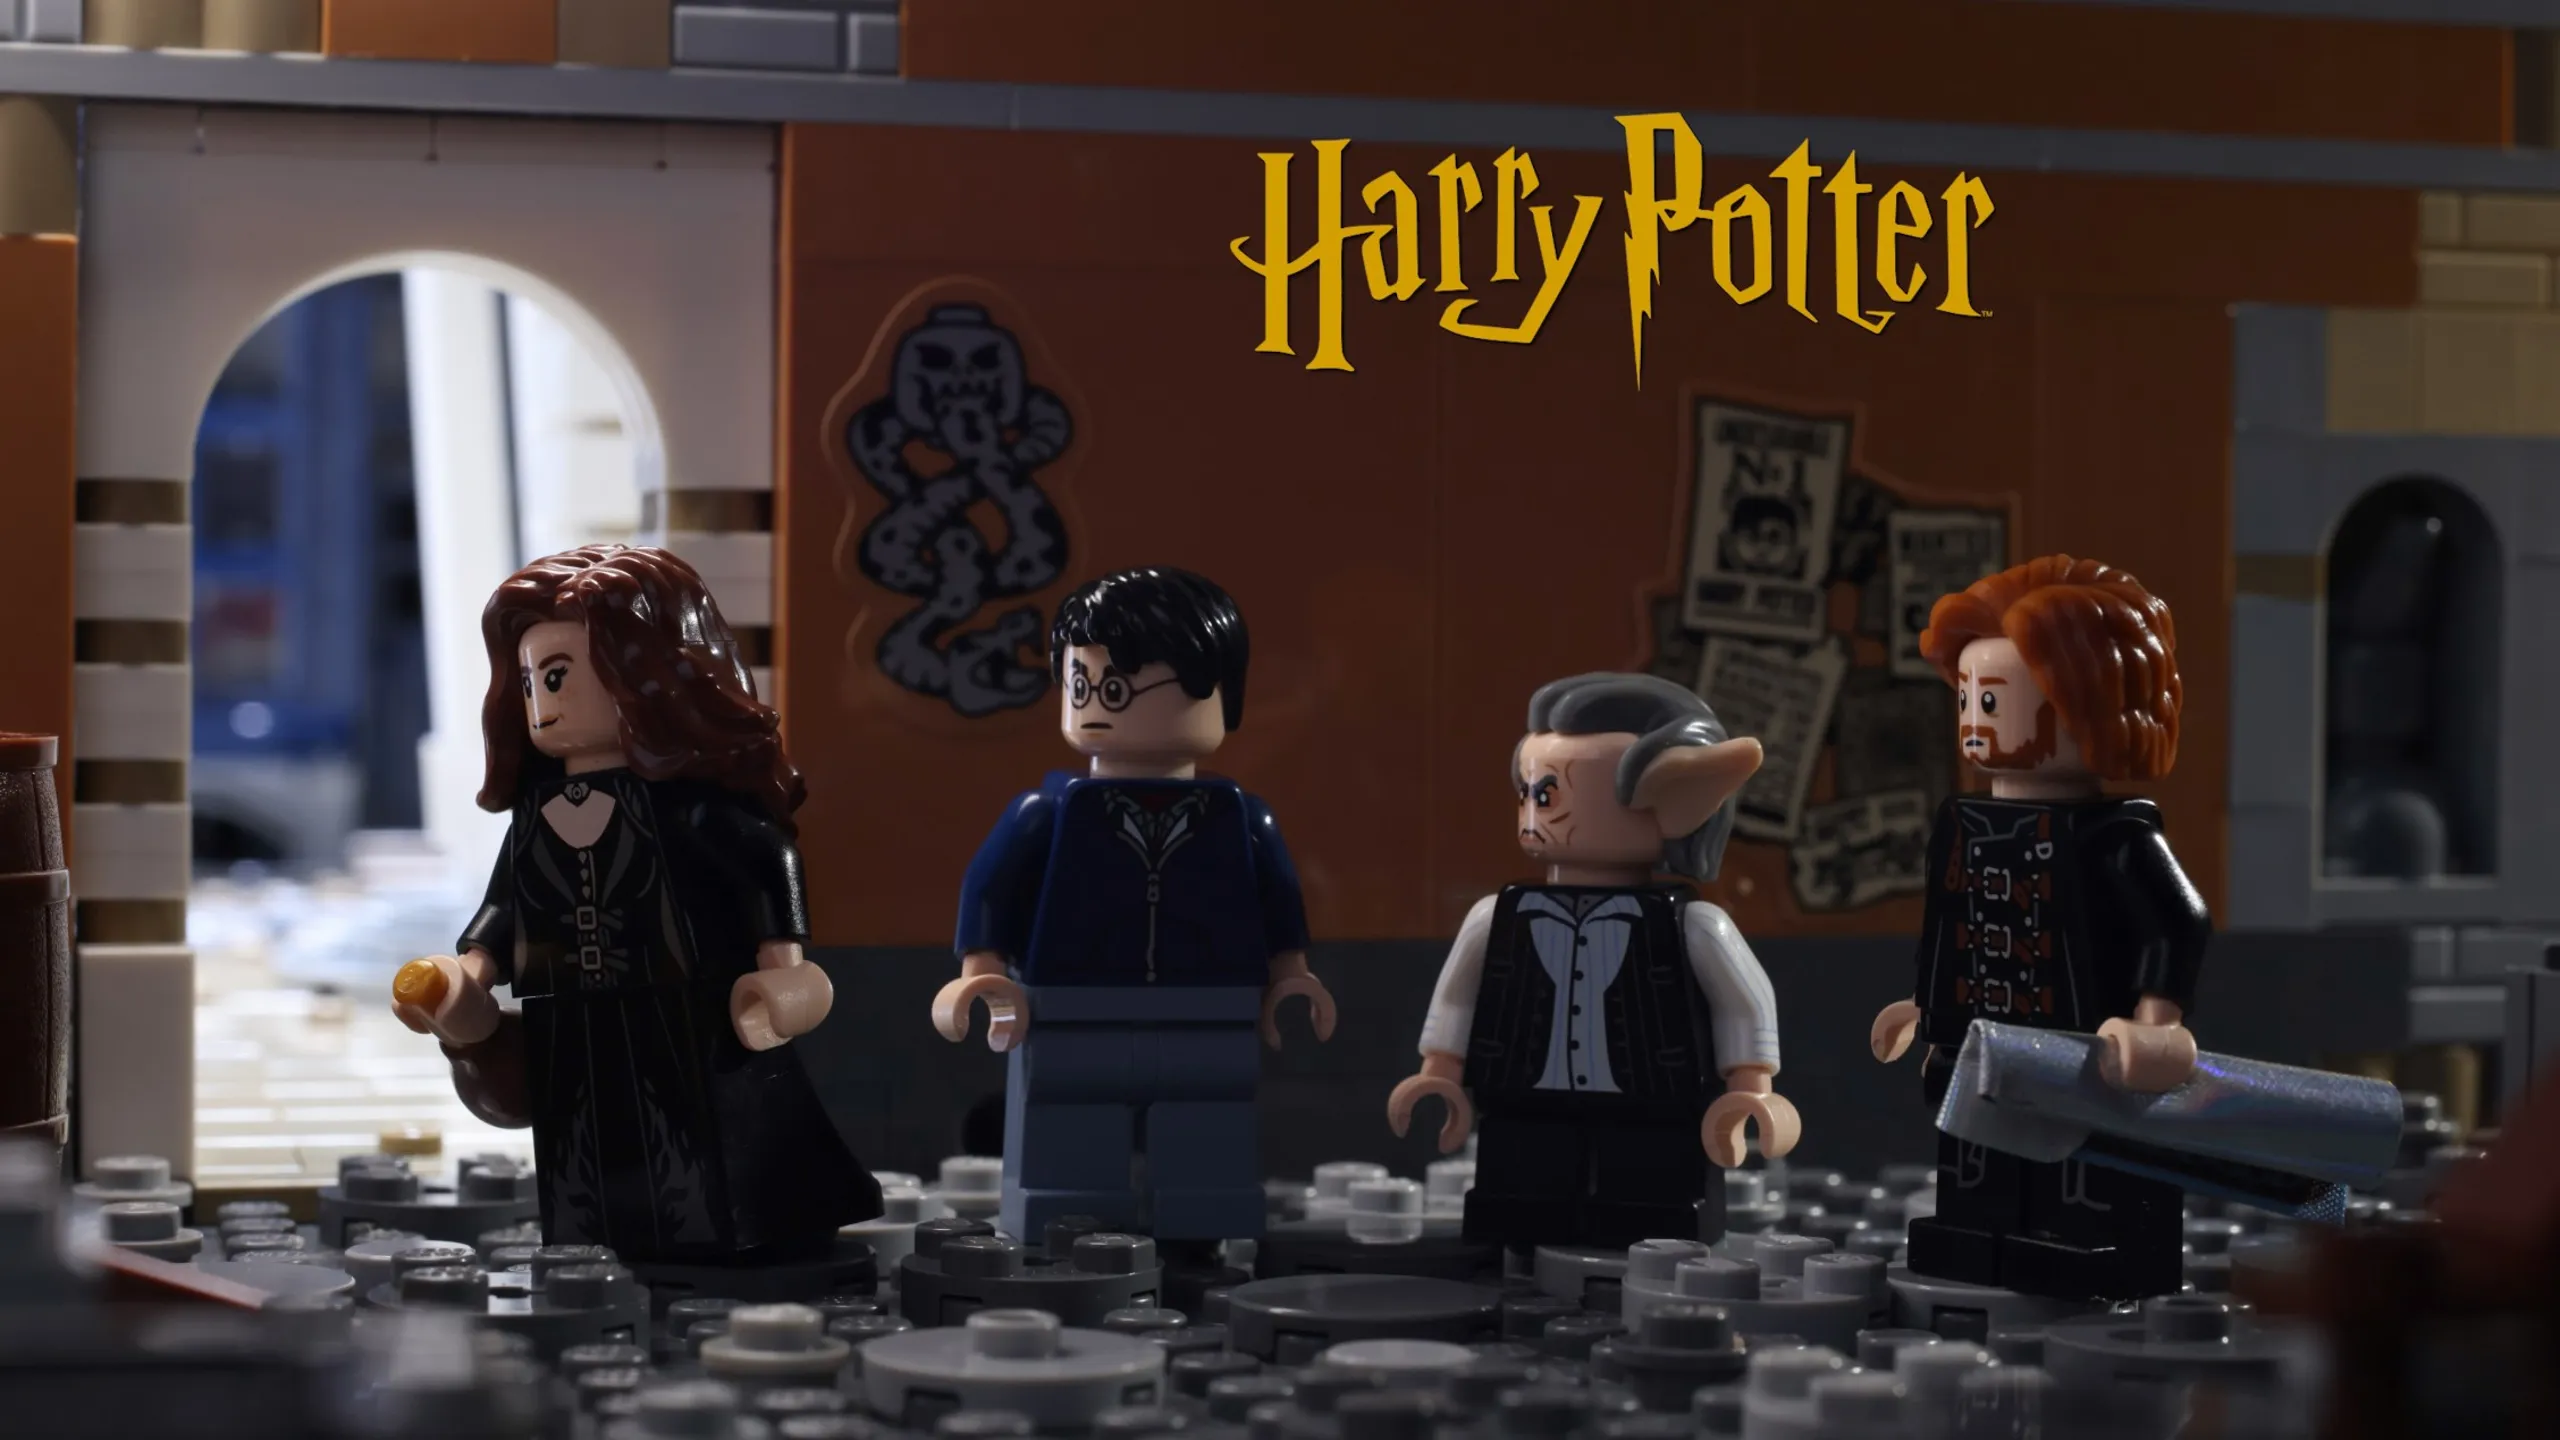 It looks like Harry Potter is getting another Lego game